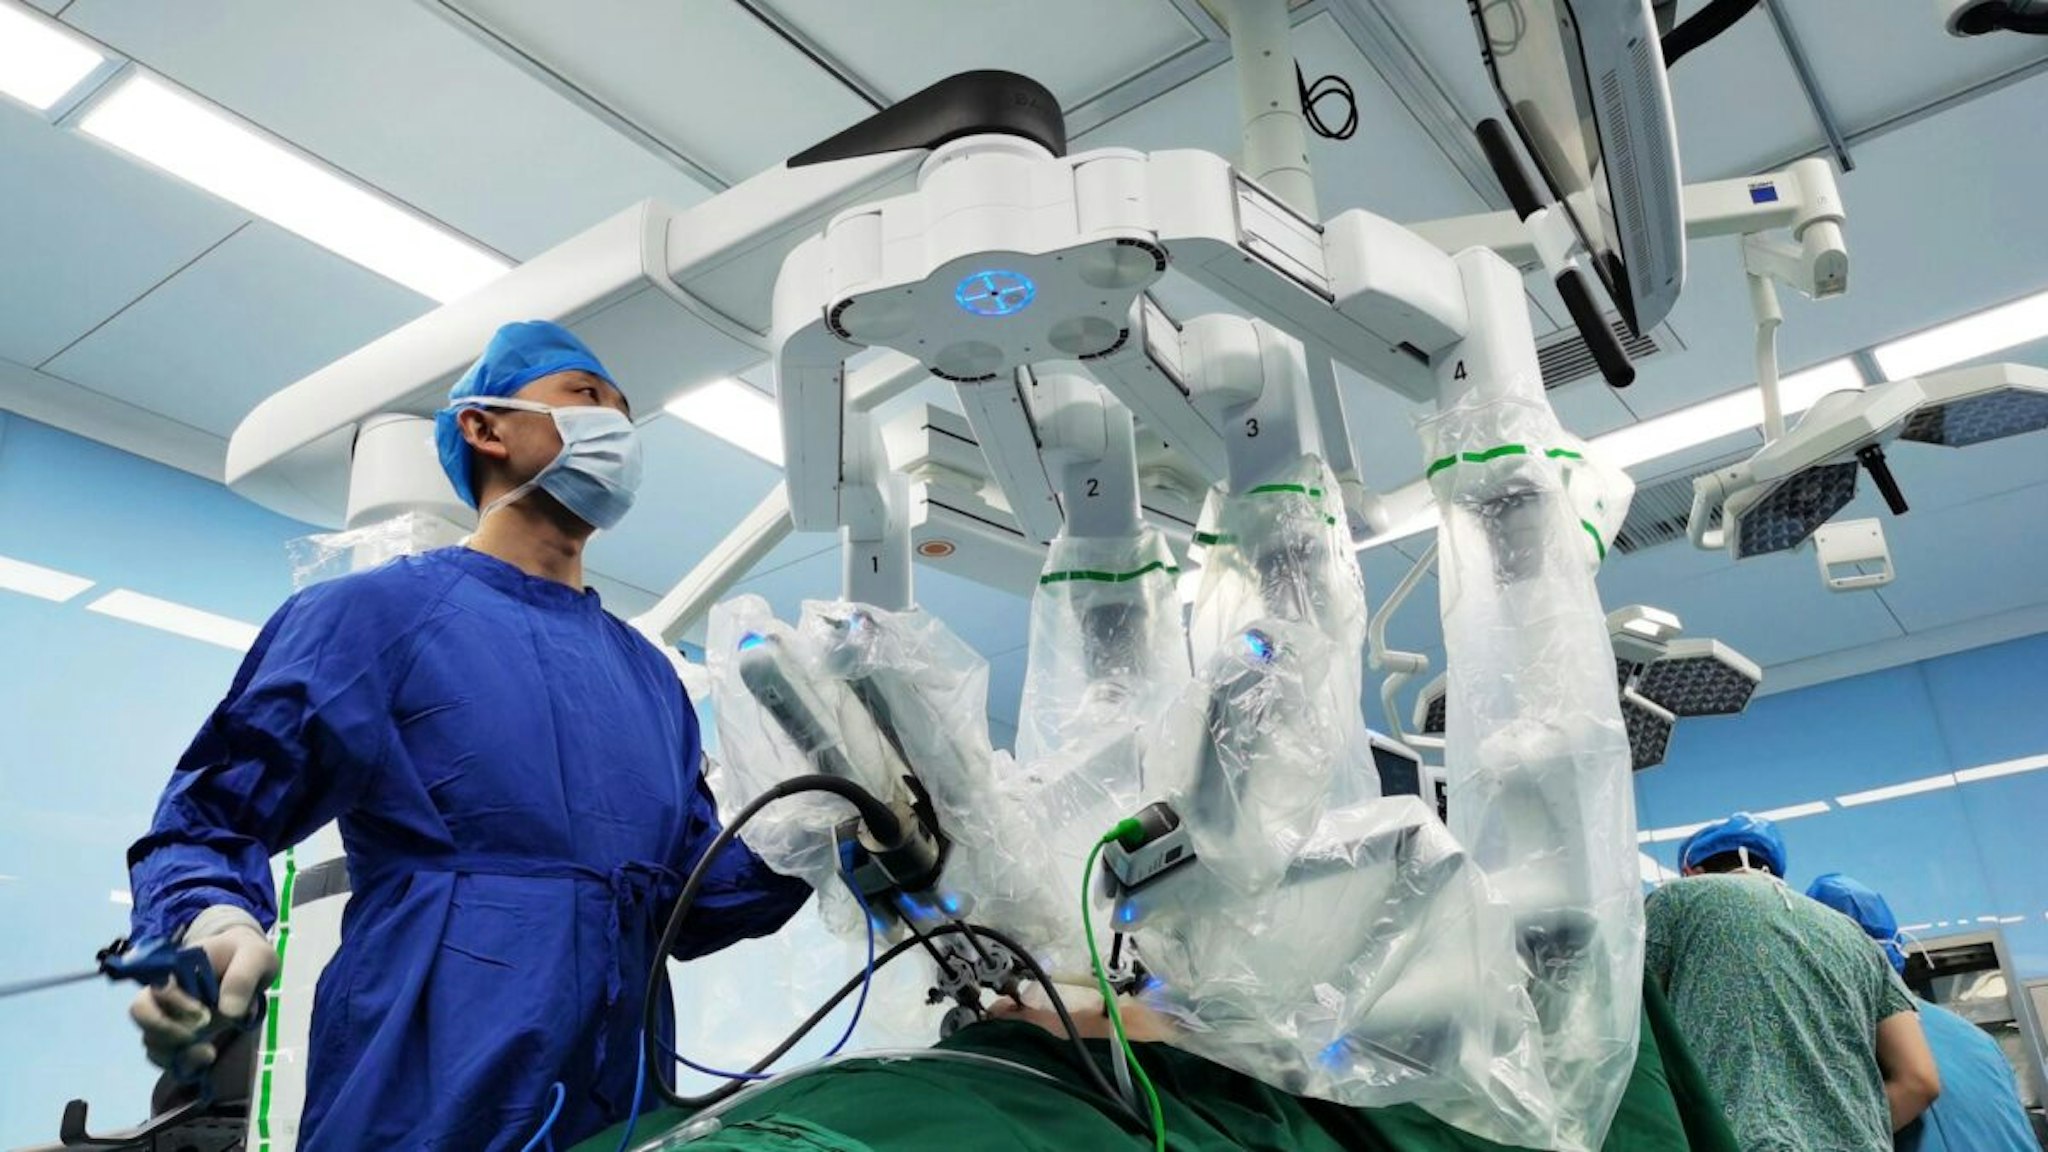 Surgeons operate a da Vinci Surgical robot during a surgical operation at Qinghai Provincial People's Hospital on June 11, 2020 in Xining, Qinghai Province of China.